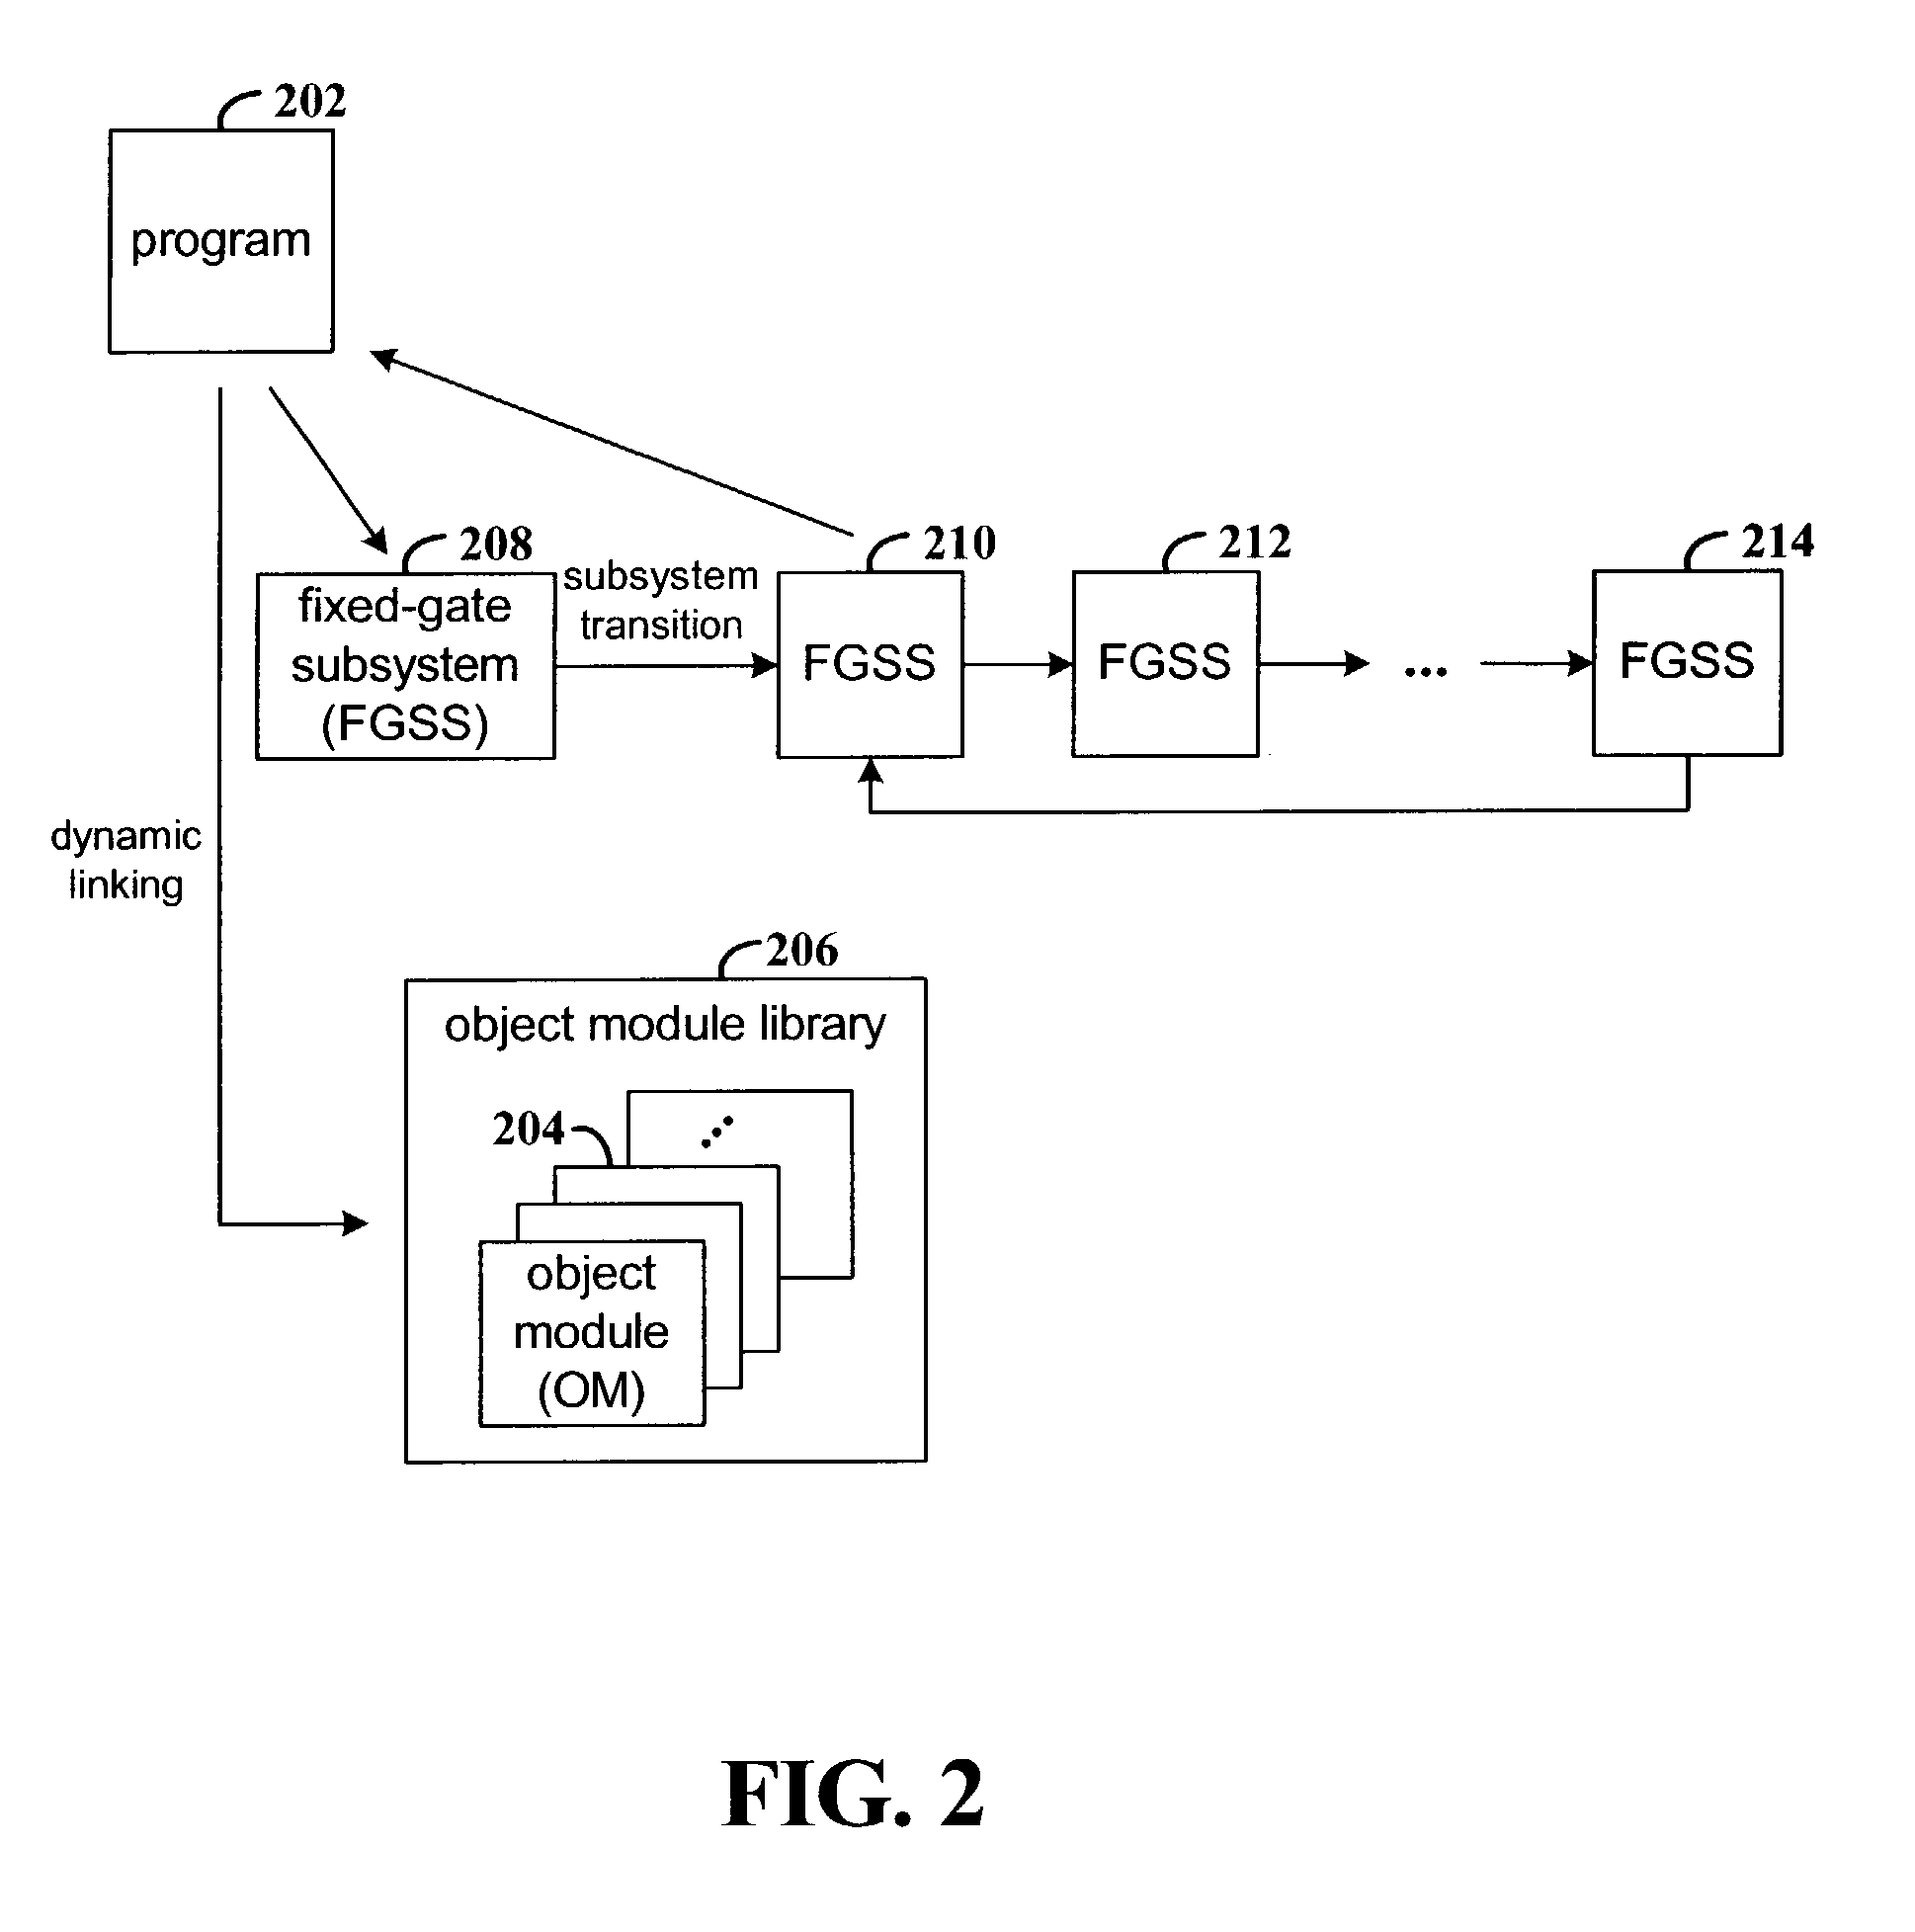 Multi-threaded memory management test system with feedback to adjust input parameters in response to performance